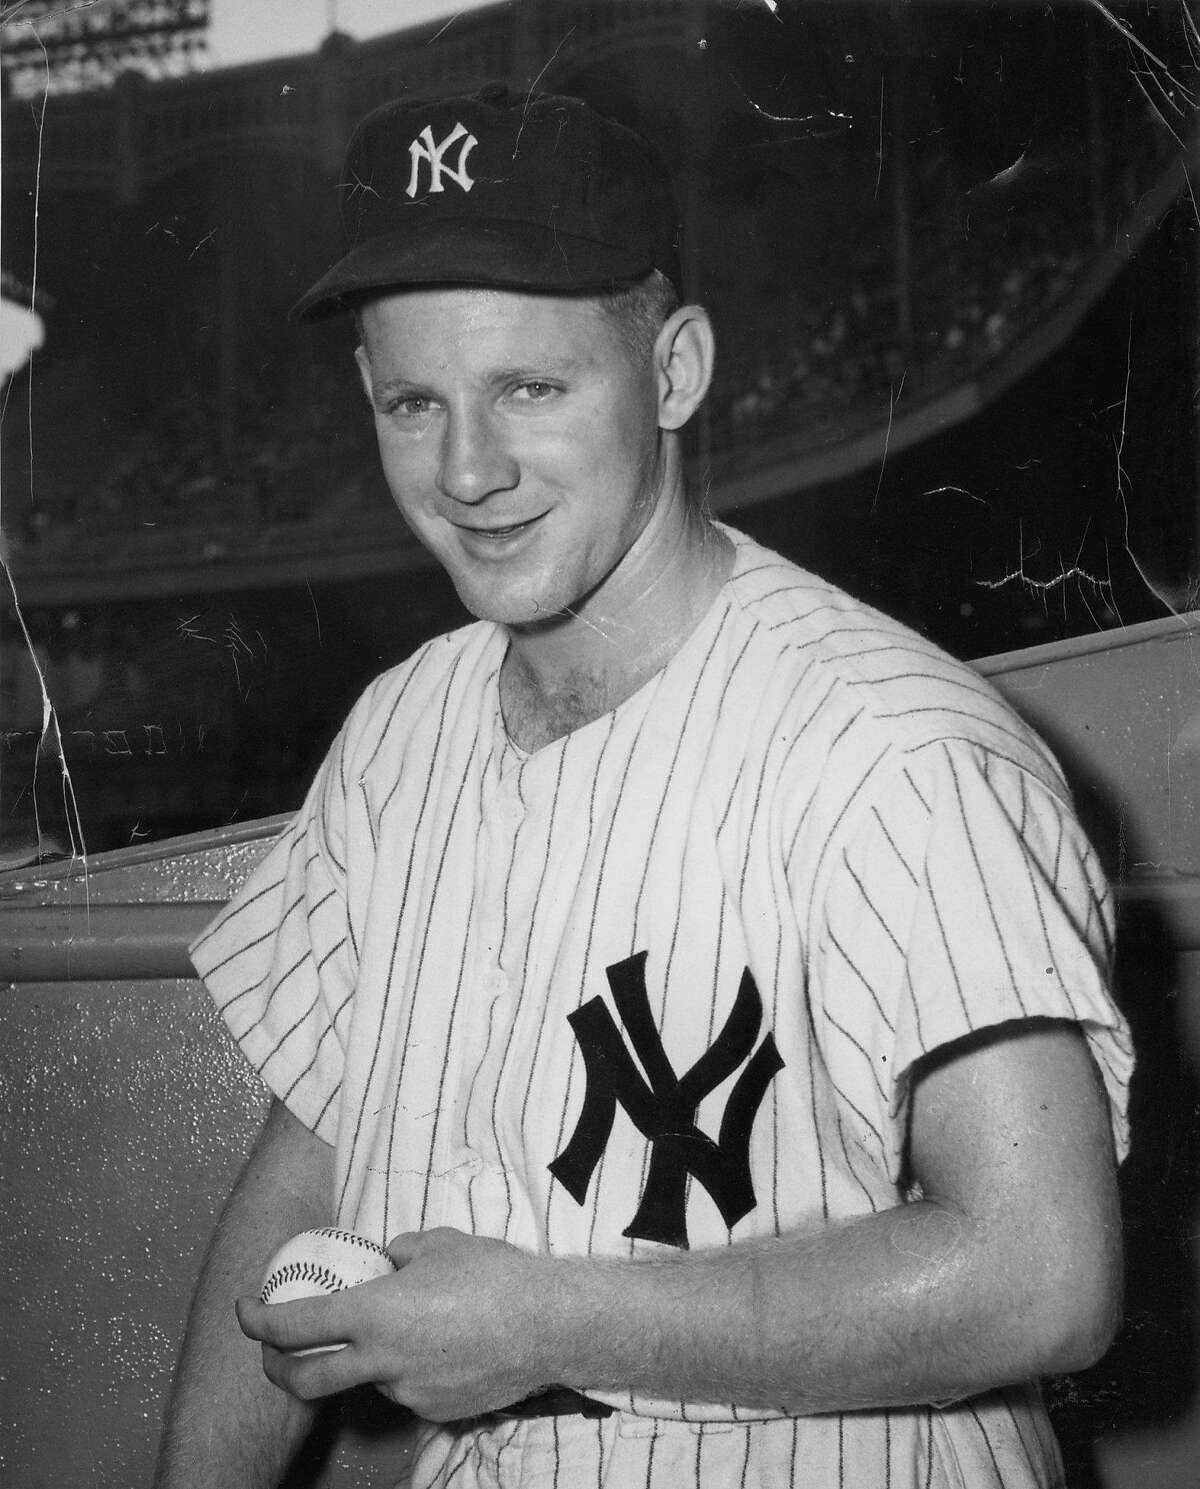 Yankees History: Whitey Ford's inconspicuous major league debut